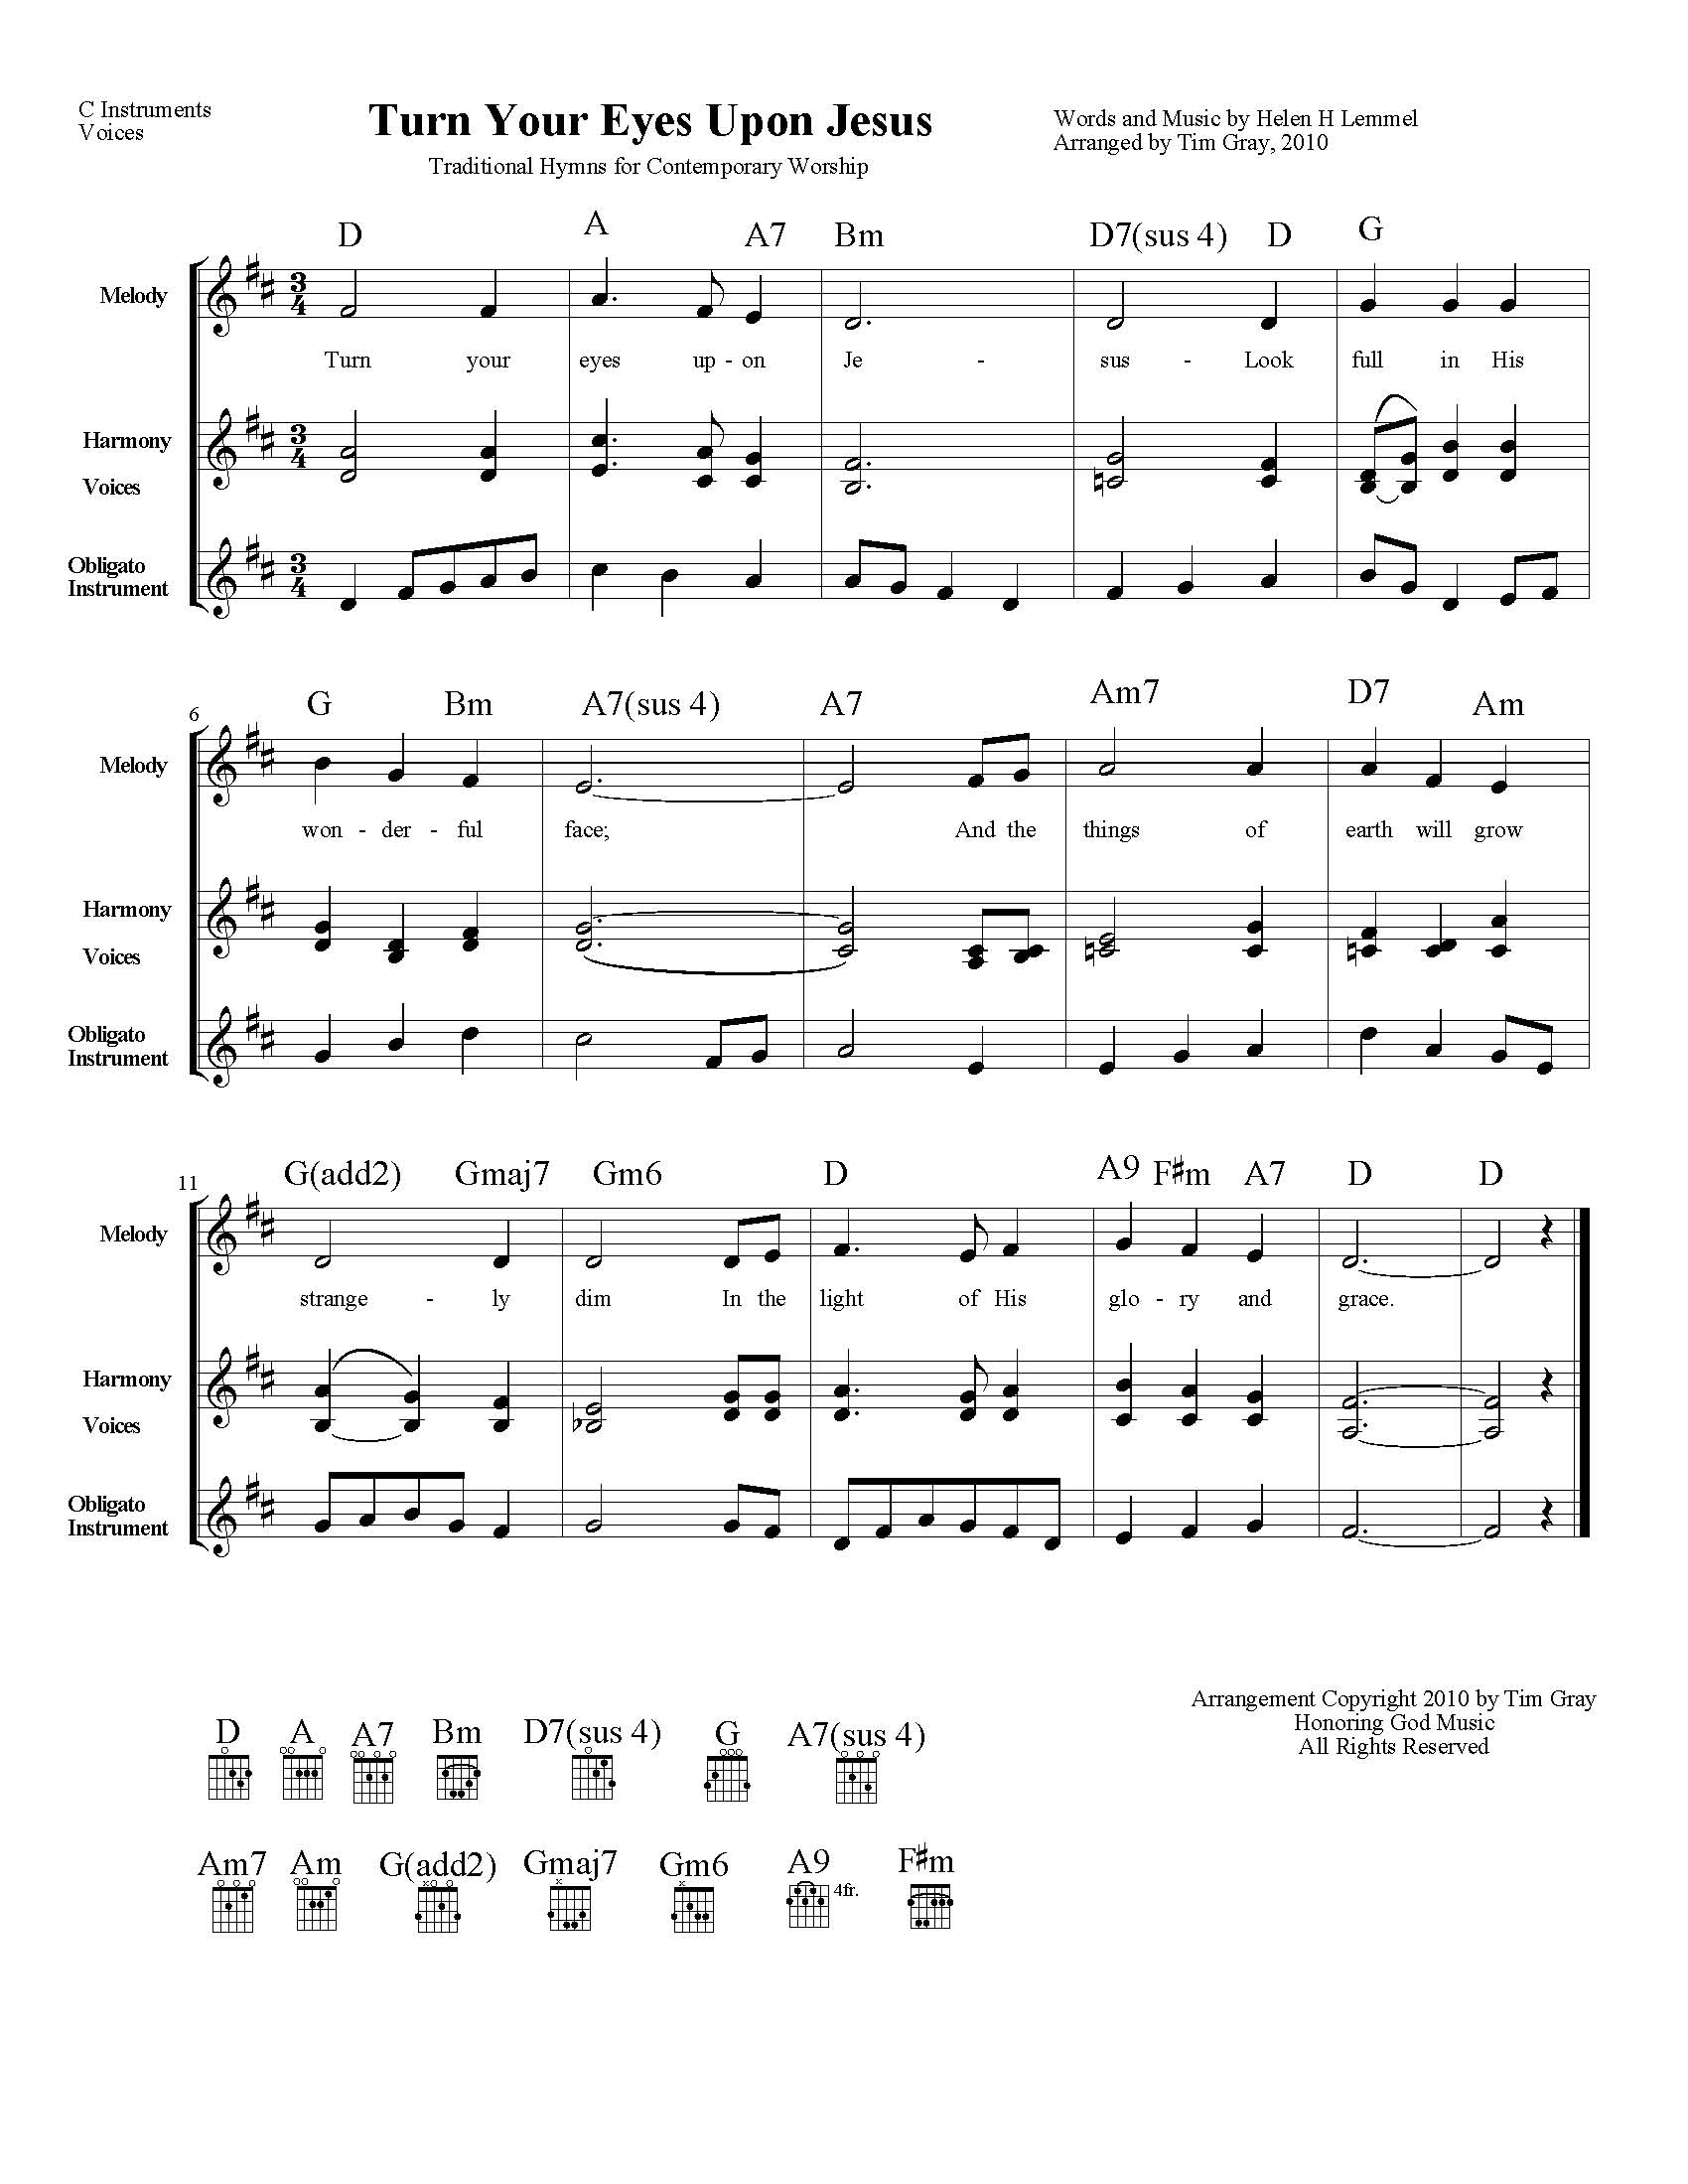 Turn Your Eyes Upon Jesus TH4CW Traditional Hymns for Contemporary Worship sample page on HonoringGodMusic.com